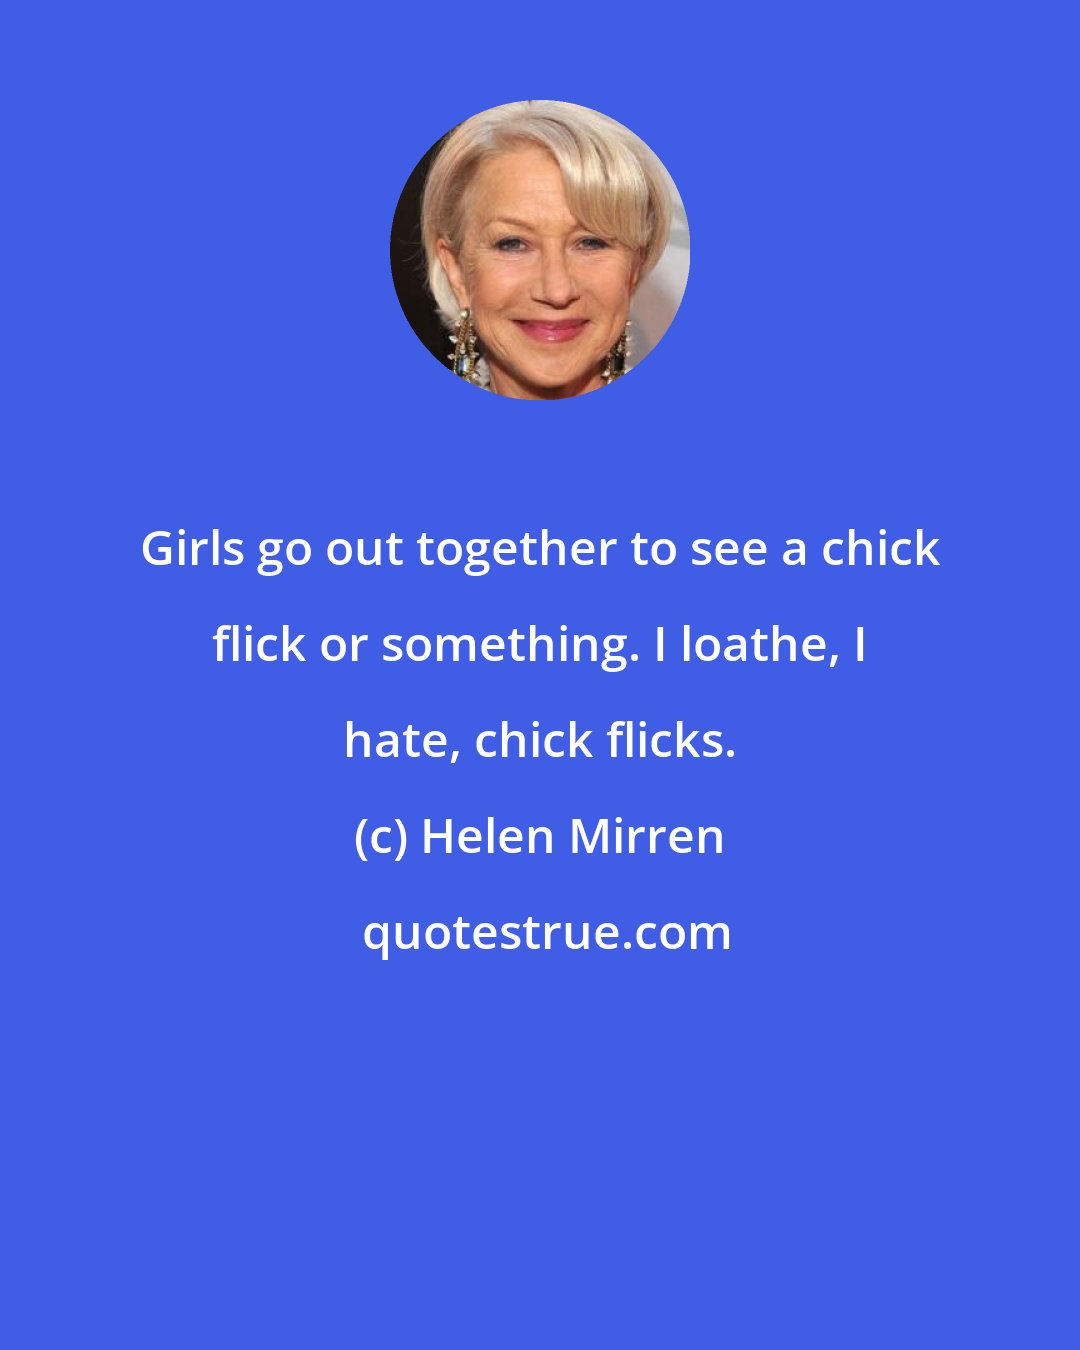 Helen Mirren: Girls go out together to see a chick flick or something. I loathe, I hate, chick flicks.